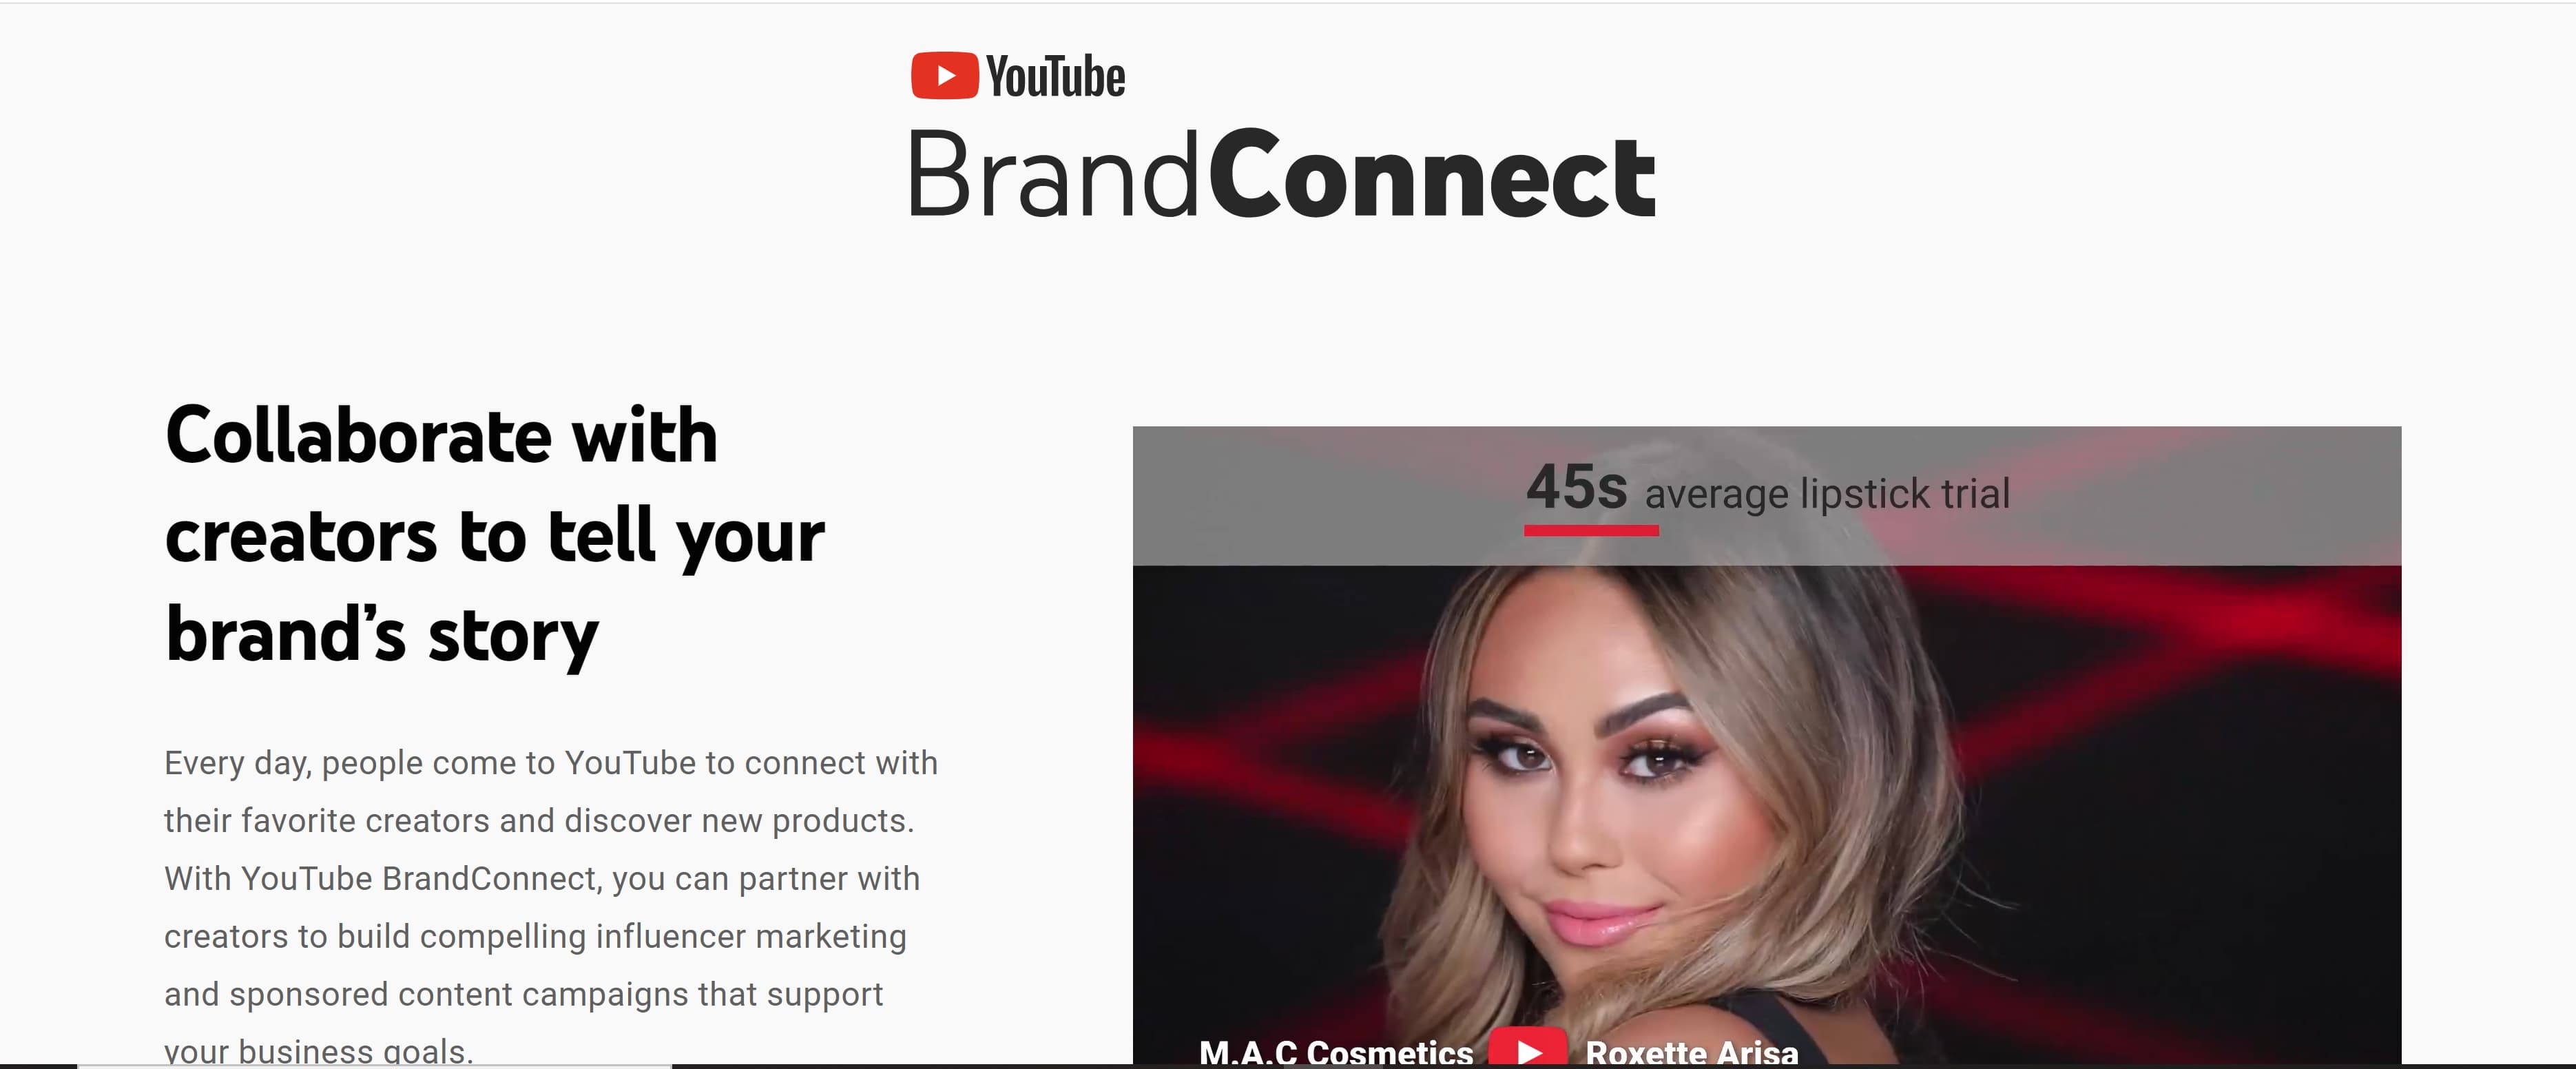 YT%20brand%20connect.jpg?width=3740&height=1552&name=YT%20brand%20connect - The Top Channels for Influencer Marketing in 2023 [New Data]